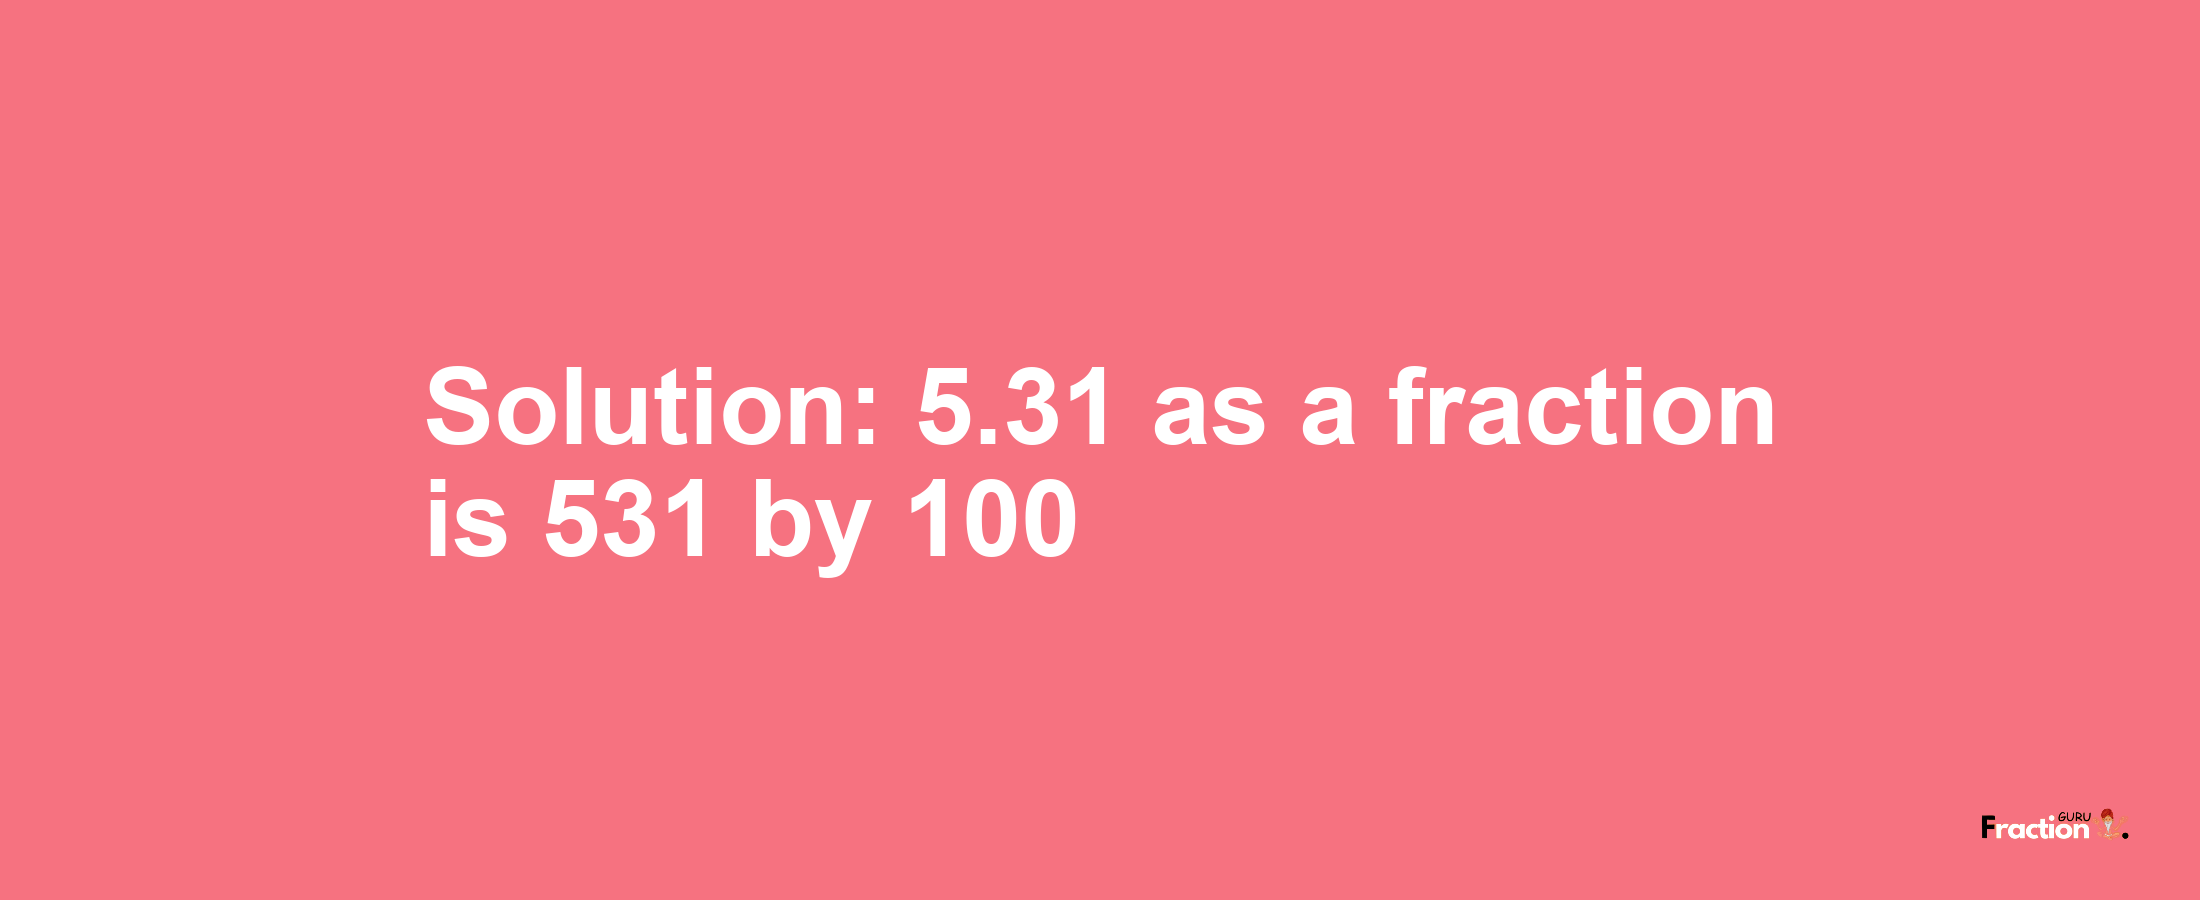 Solution:5.31 as a fraction is 531/100